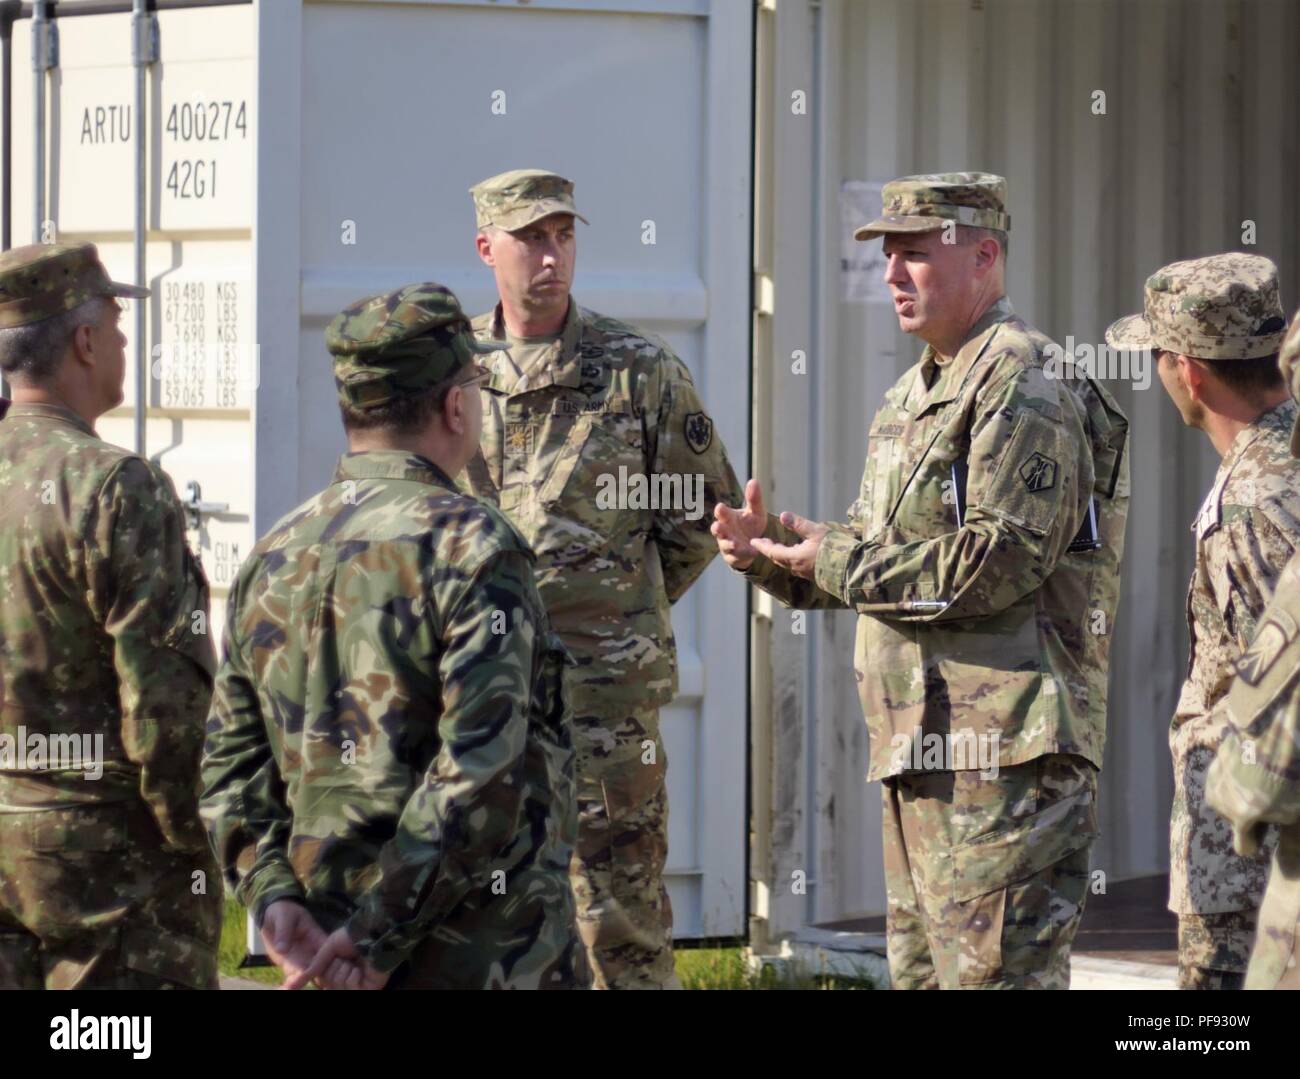 Brigadier Gen. Fred Maiocco, Commanding General of the 7th Mission Support  Command headquartered in Kaiserslautern, Germany, hosted a delegation of  partner nations during Saber Strike 18, June 4, in Powidz Poland. The